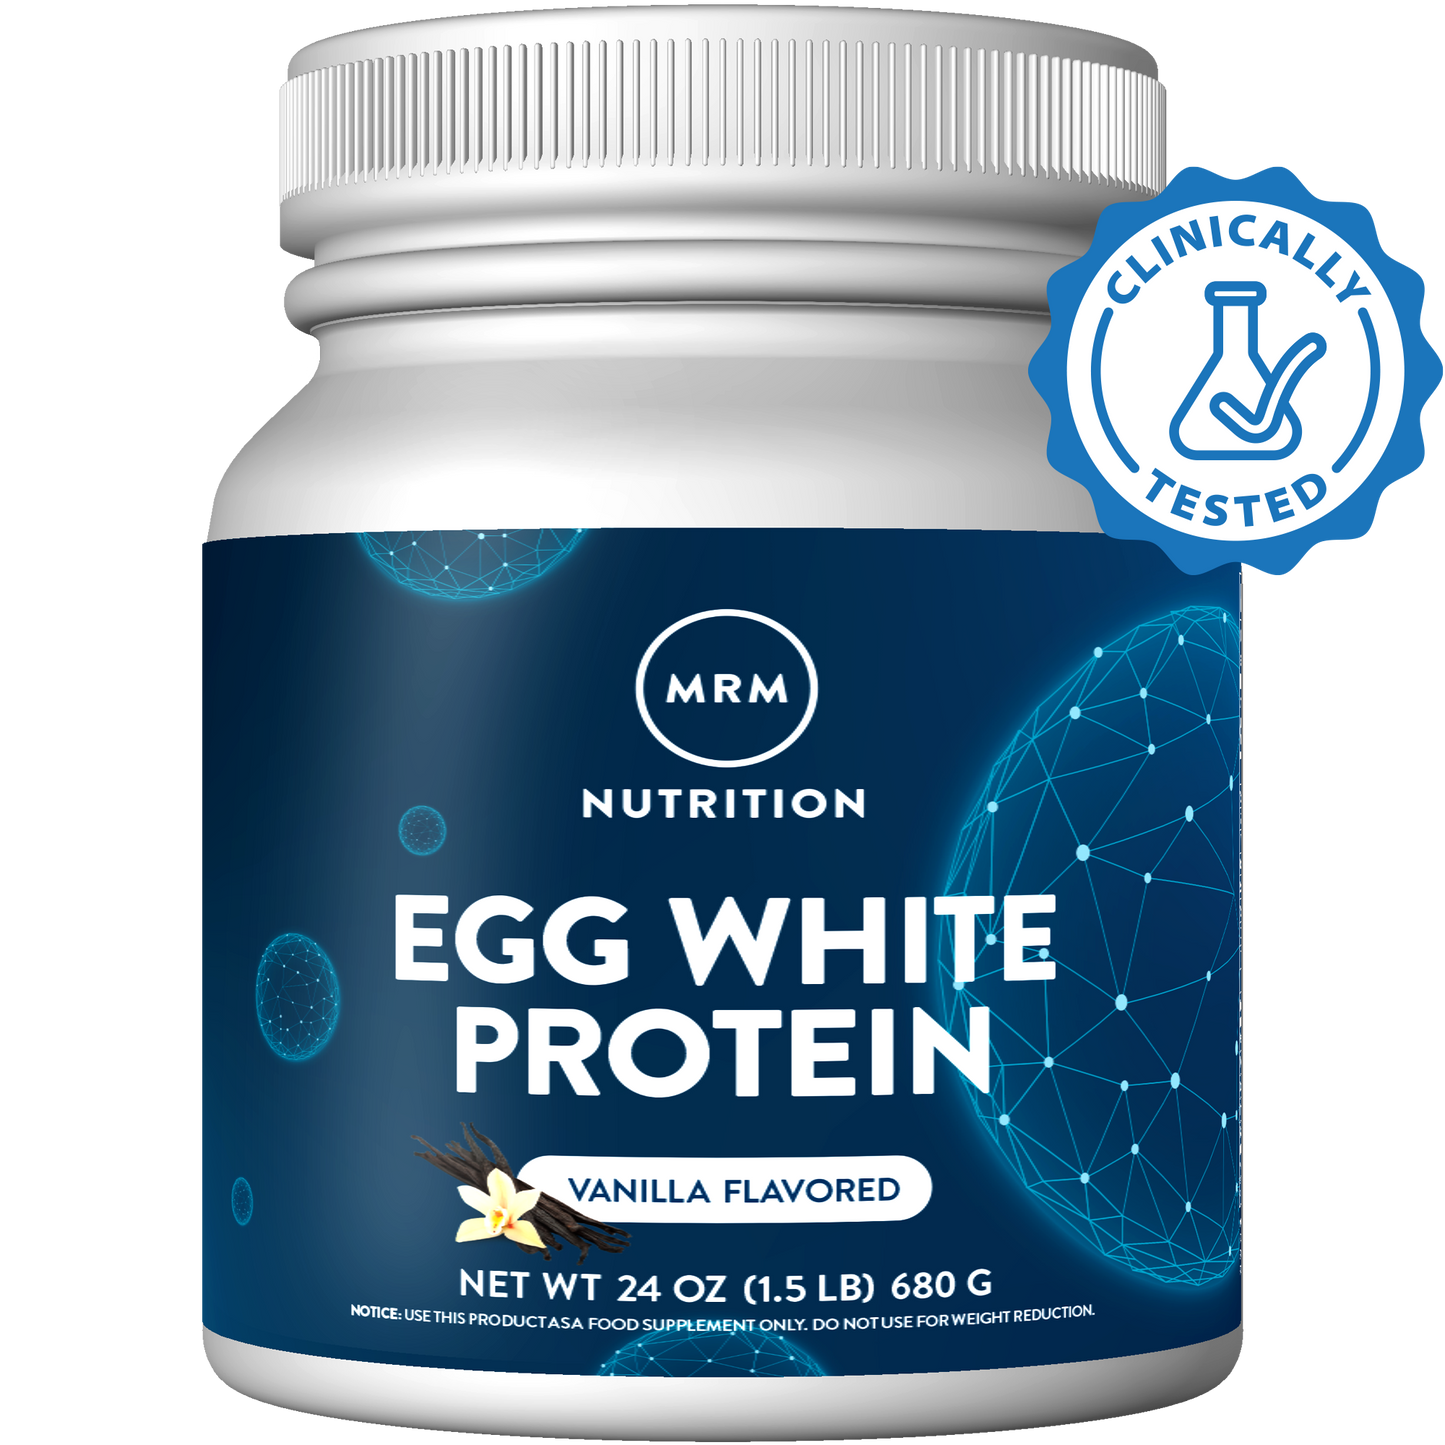 Egg White Protein Chocolate Flavored (24oz)